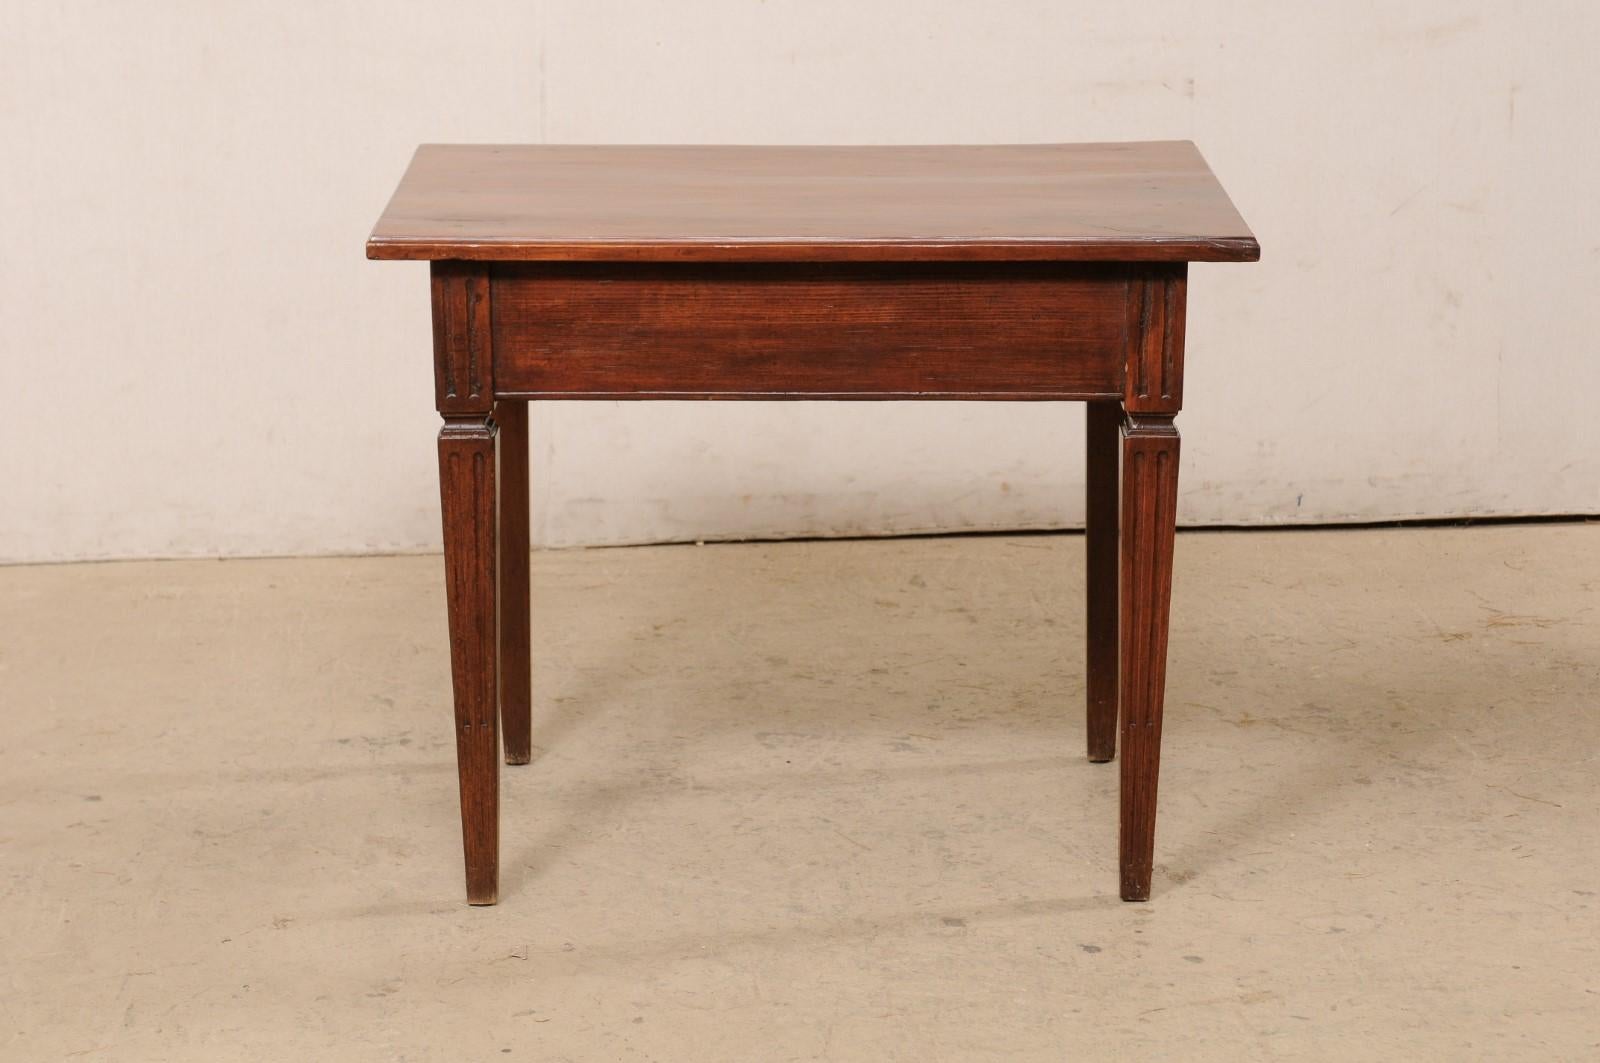 Italian Small Wooden Table w/Drawer Presented on Flute-Carved Legs, 19th C. For Sale 2